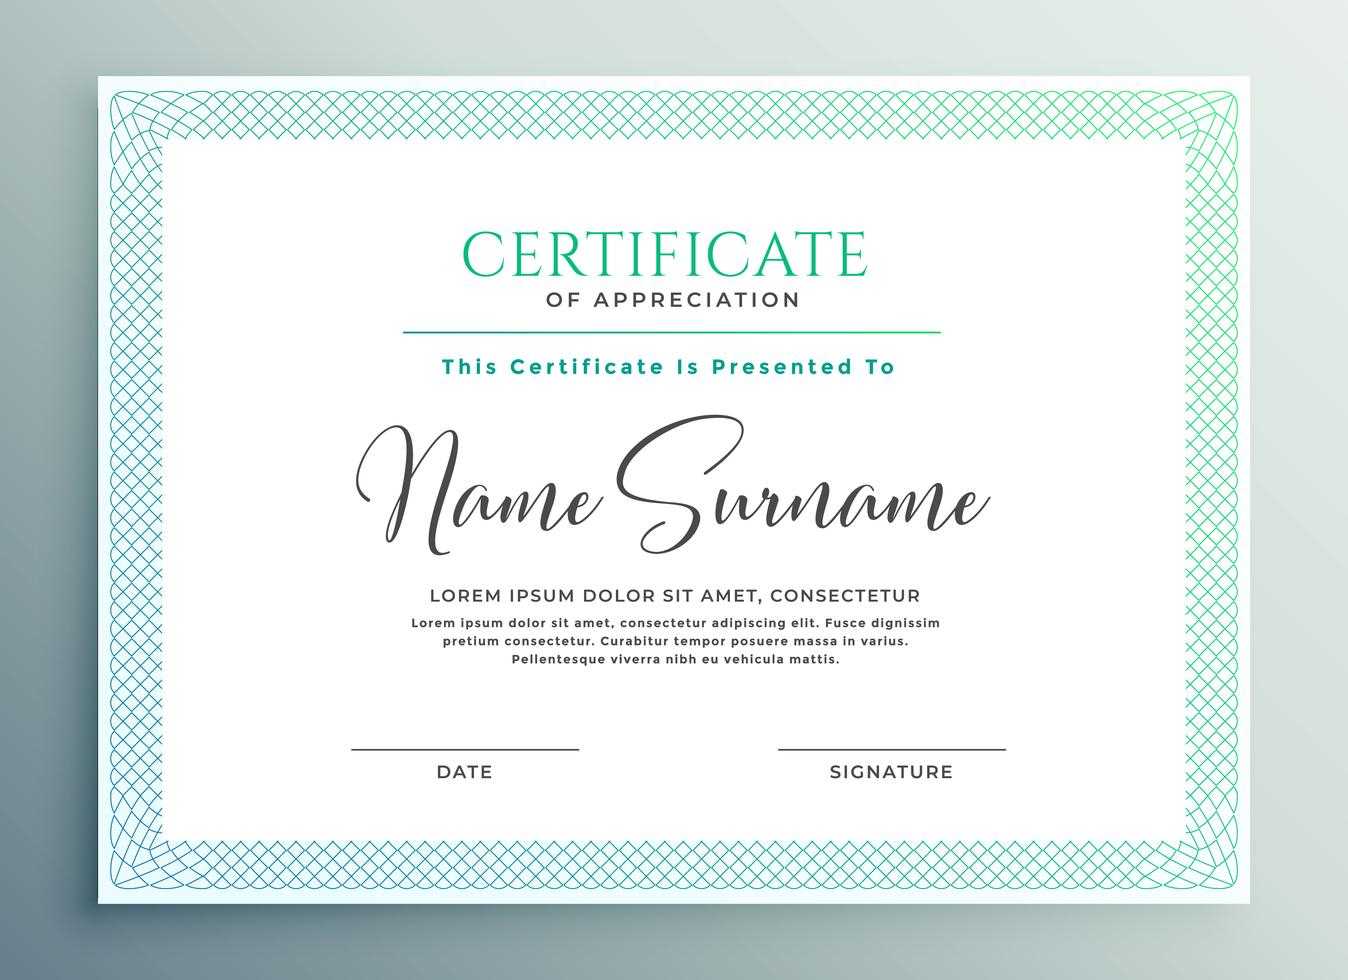 30+ Certificate Of Appreciation Download!! | Templates Study With Volunteer Award Certificate Template